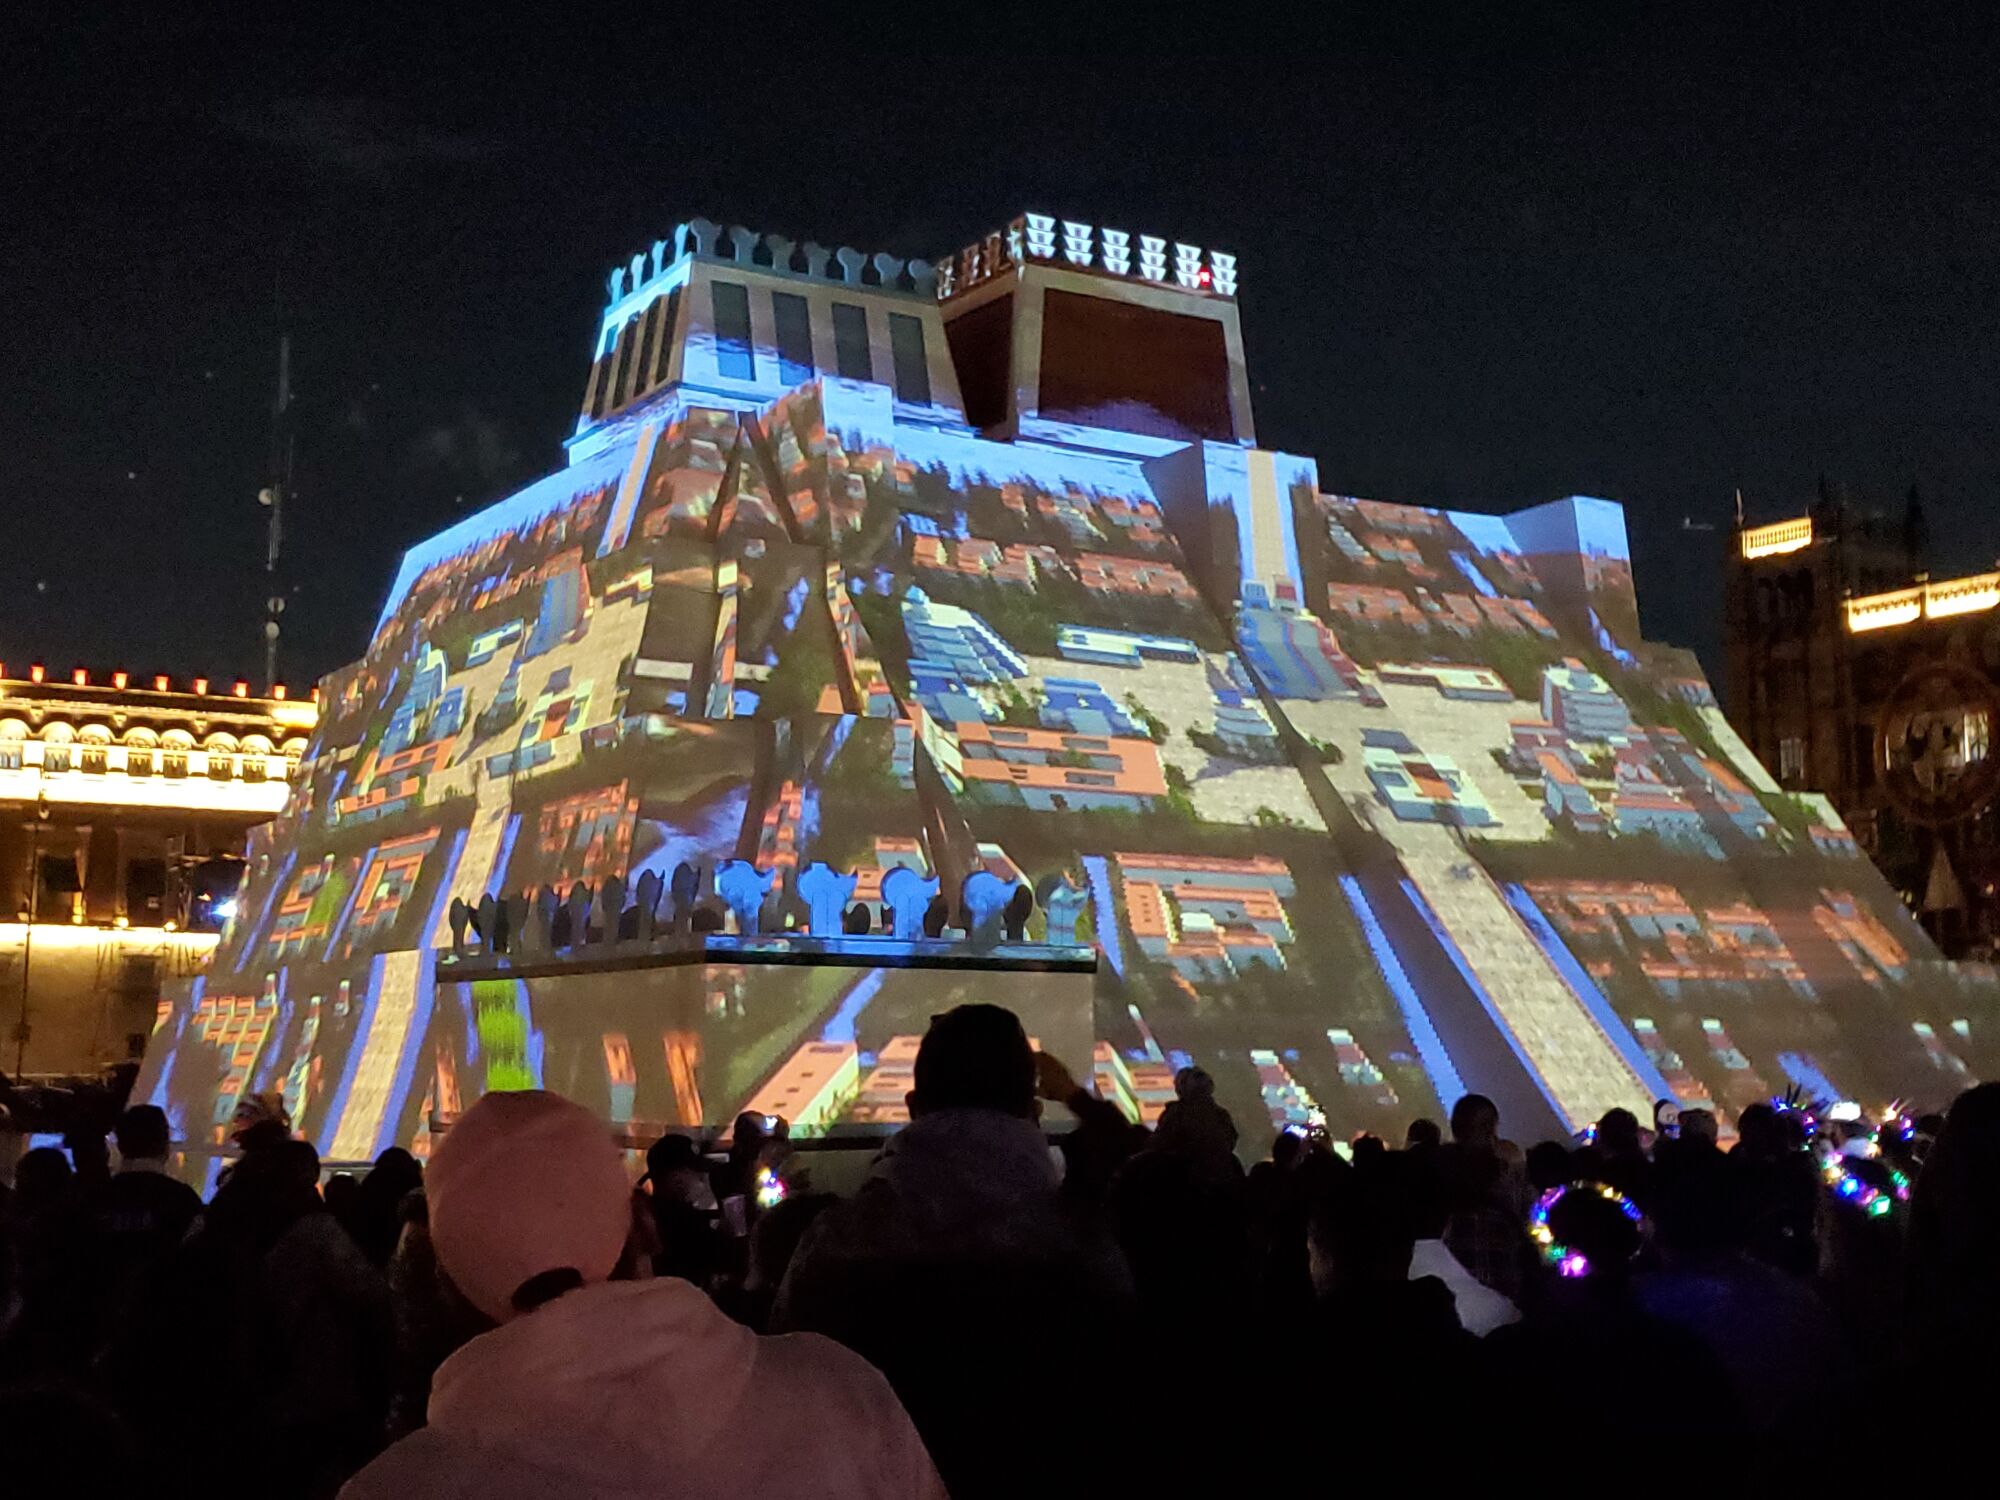 Lights and a video show are reflected on a 50-foot replica of the original Templo Mayor pyramid in Mexico City.